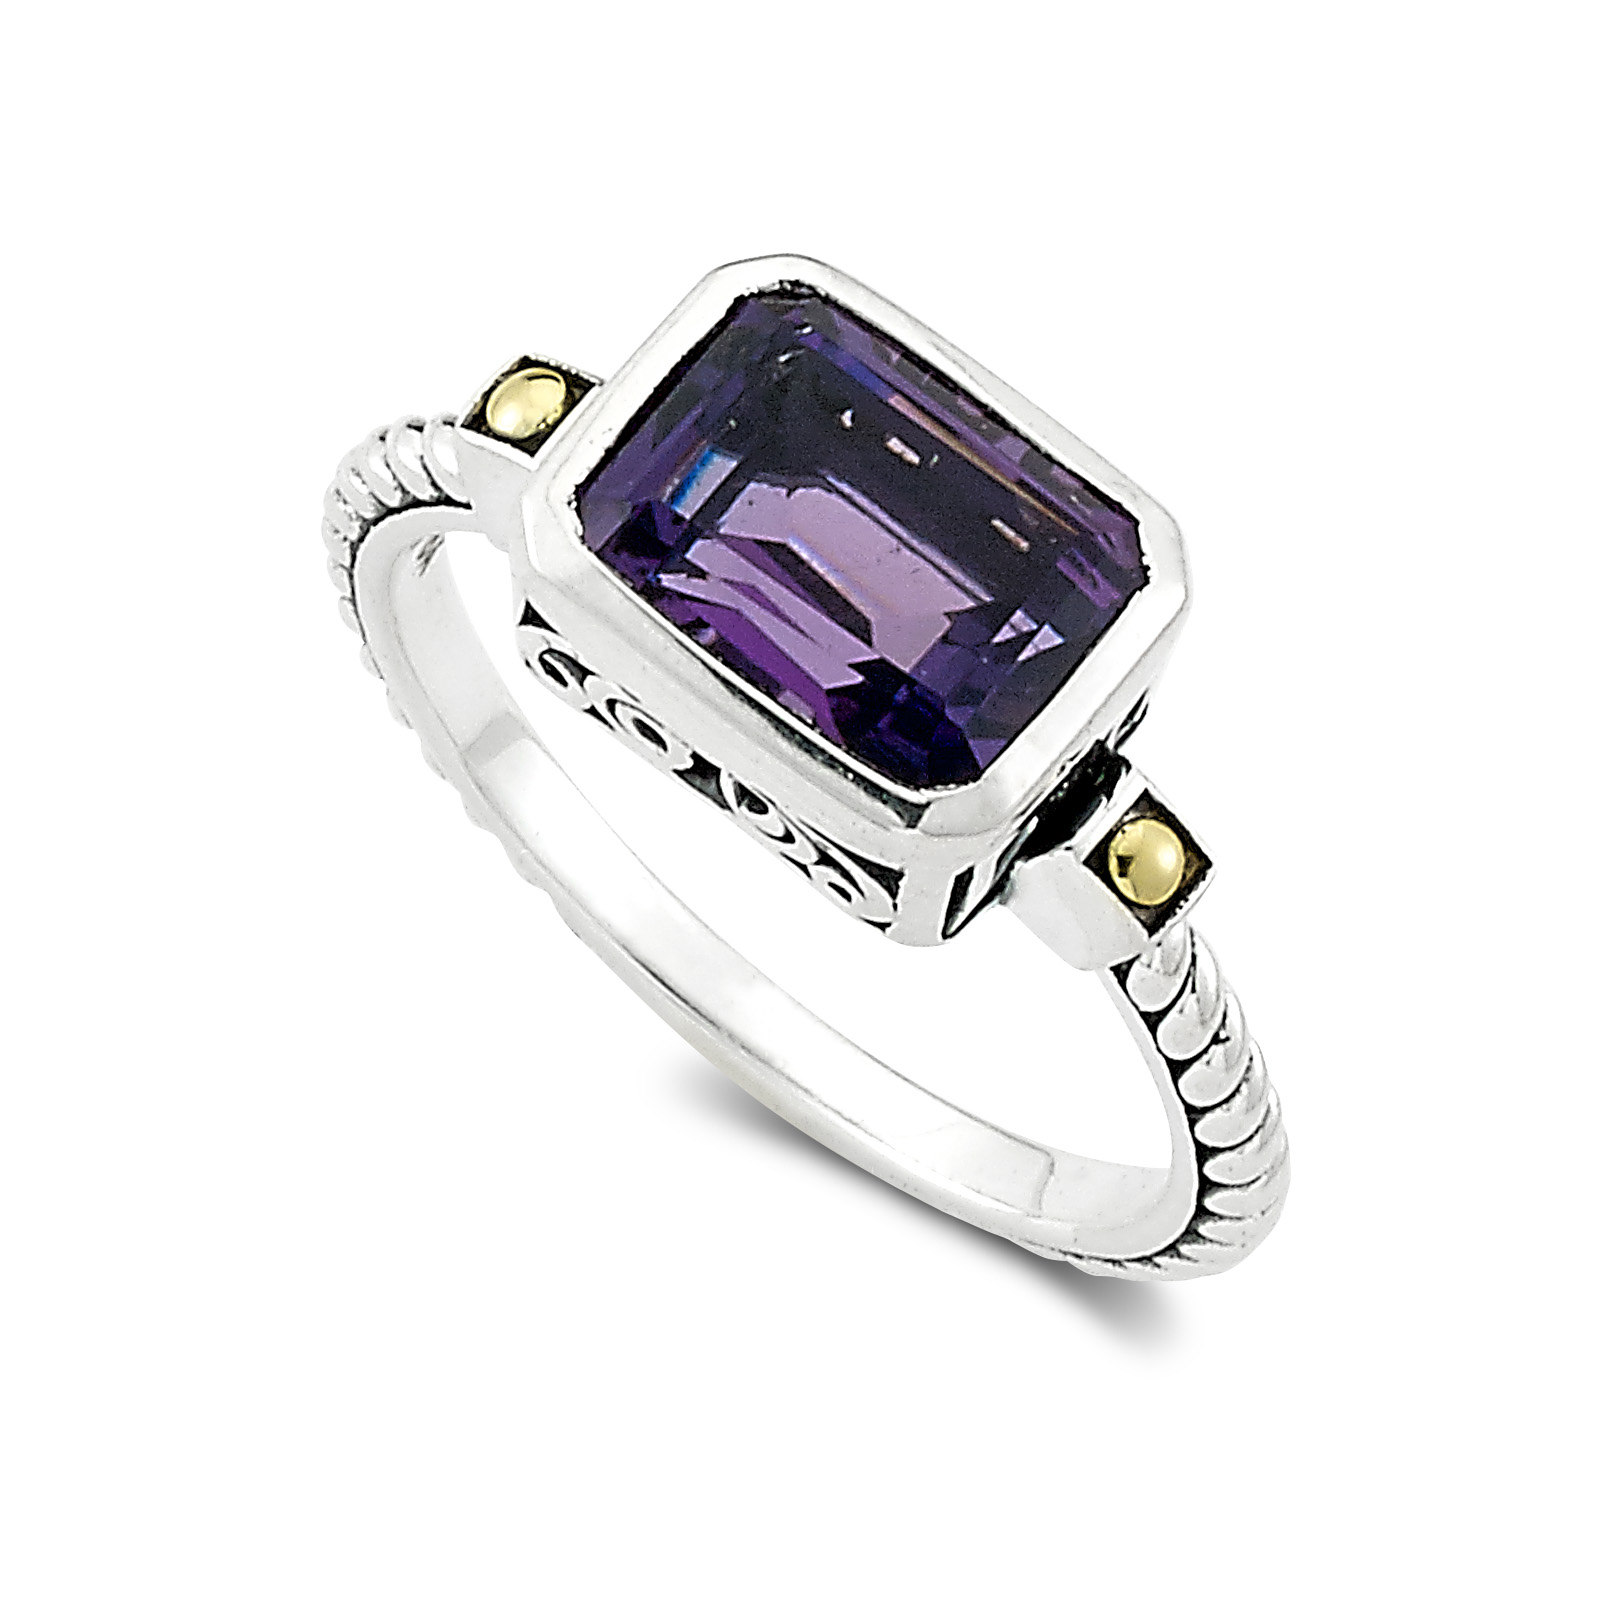 One sterling silver Eirini ring with solid 18 karat yellow gold accents and an emerald-shaped amethyst